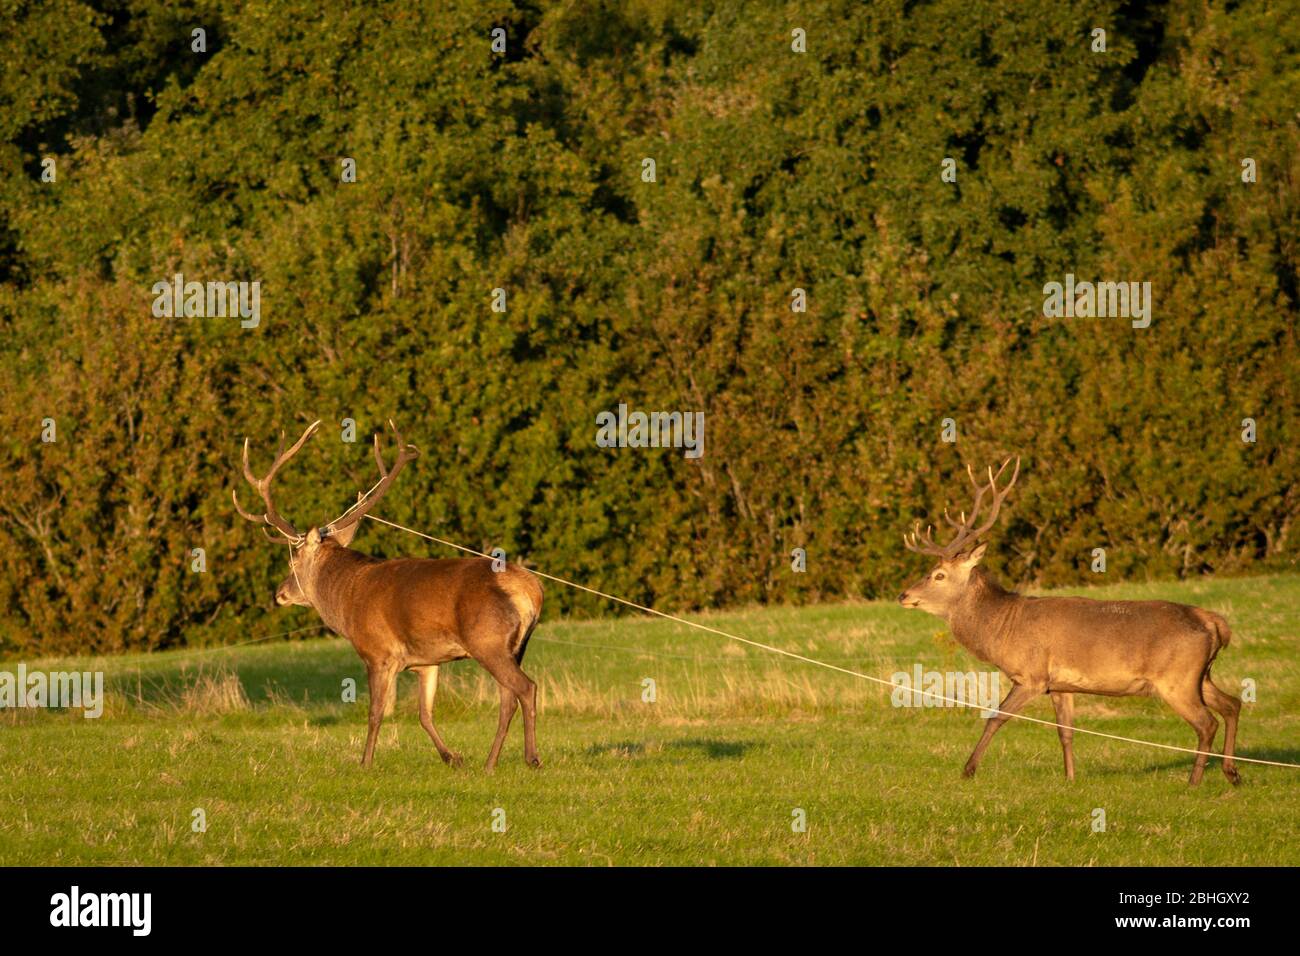 red-deer-or-cervus-elaphus-in-trouble-at-risk-with-cable-wire-caught-around-the-antlers-2BHGXY2.jpg